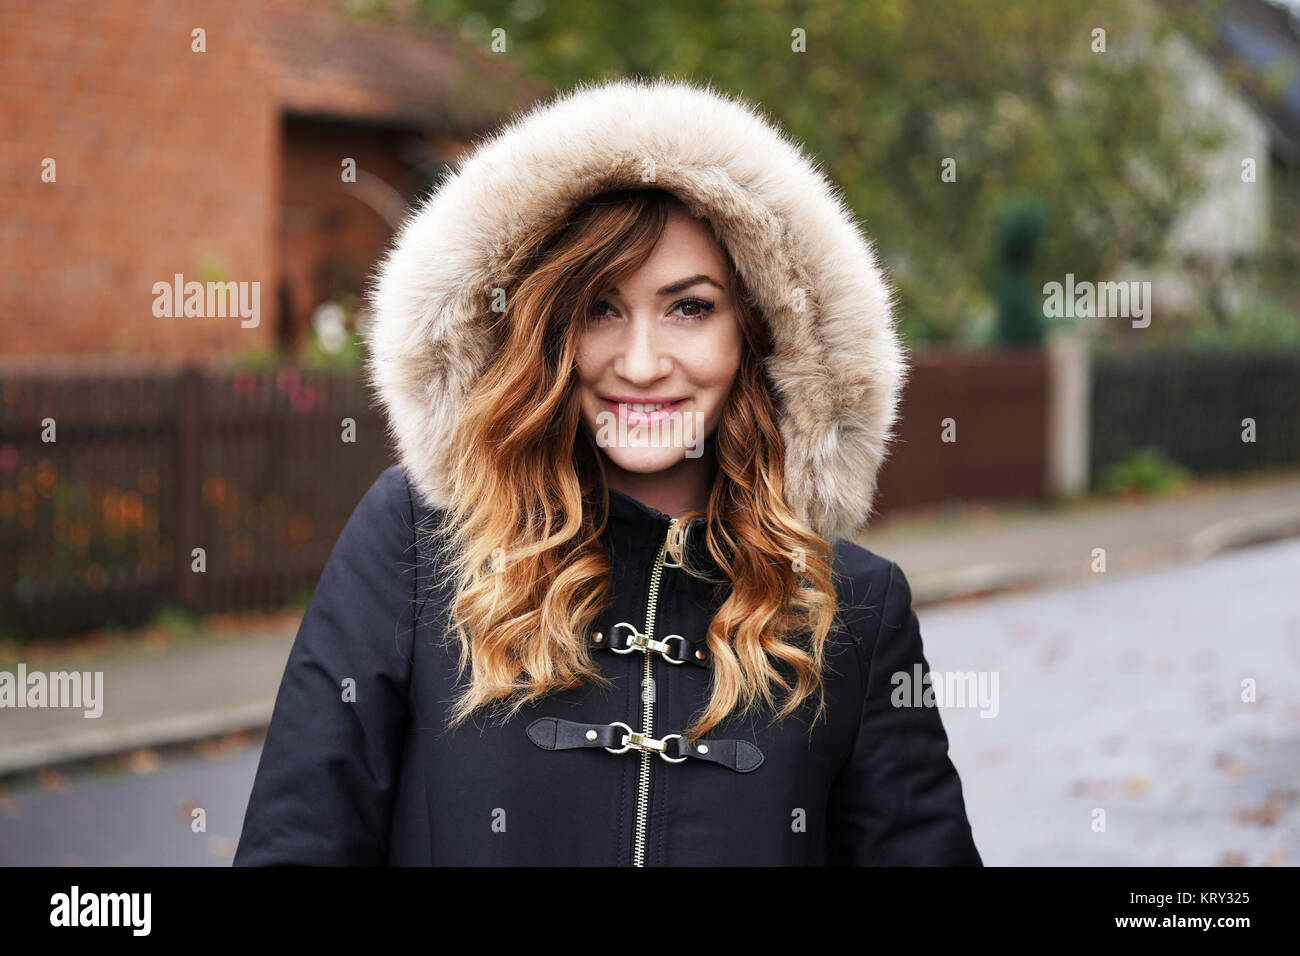 smiling young woman wearing winter coat with fake fur hood Stock Photo